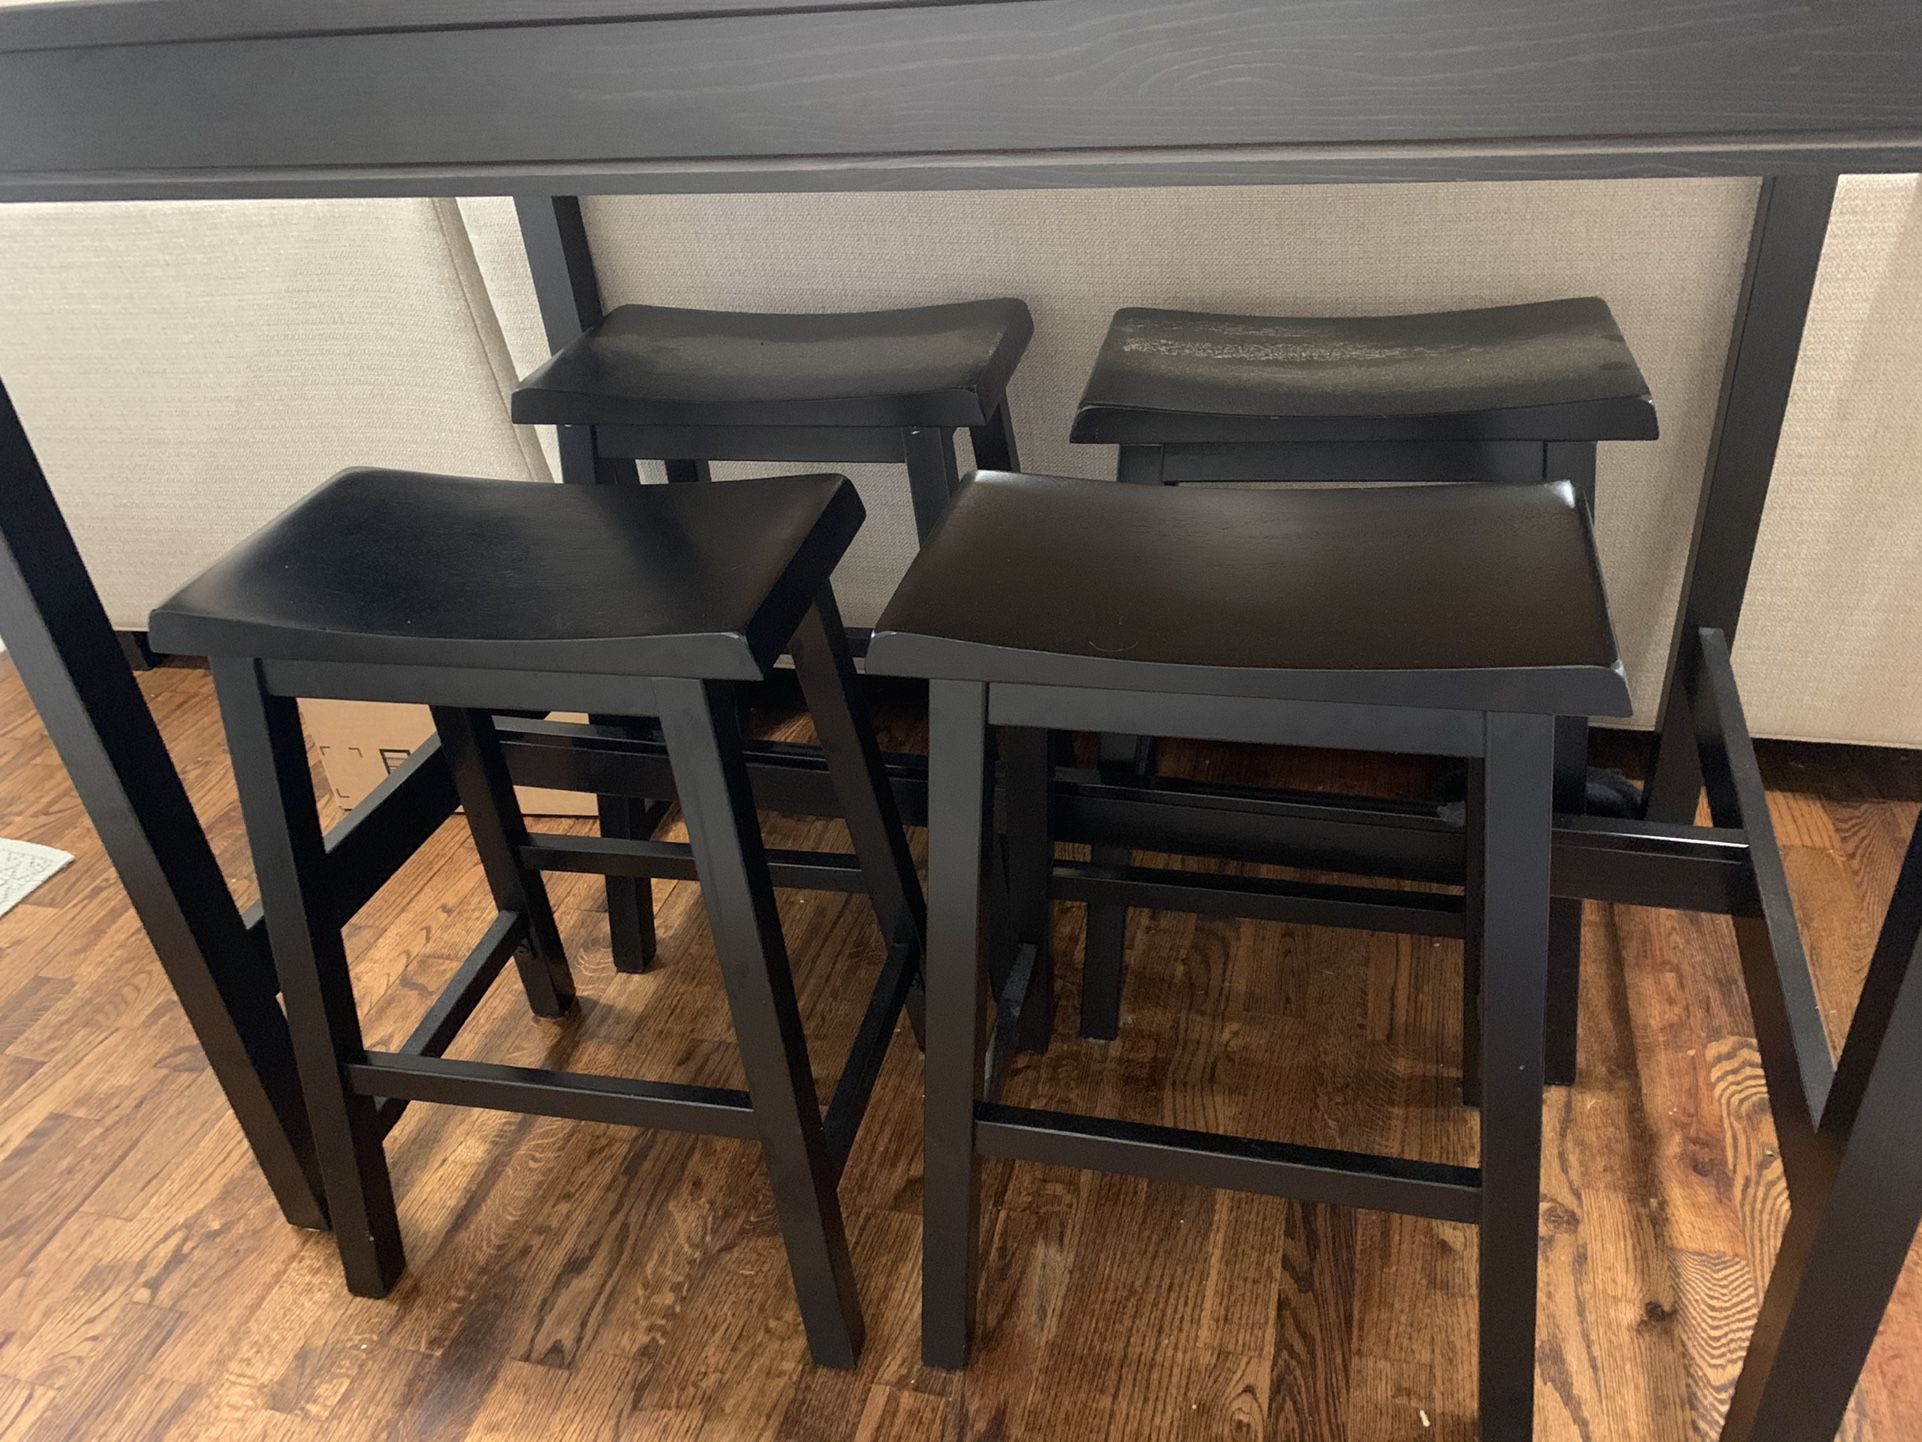 4 Counter Height Black Wood Stool/Chair $100 OBO